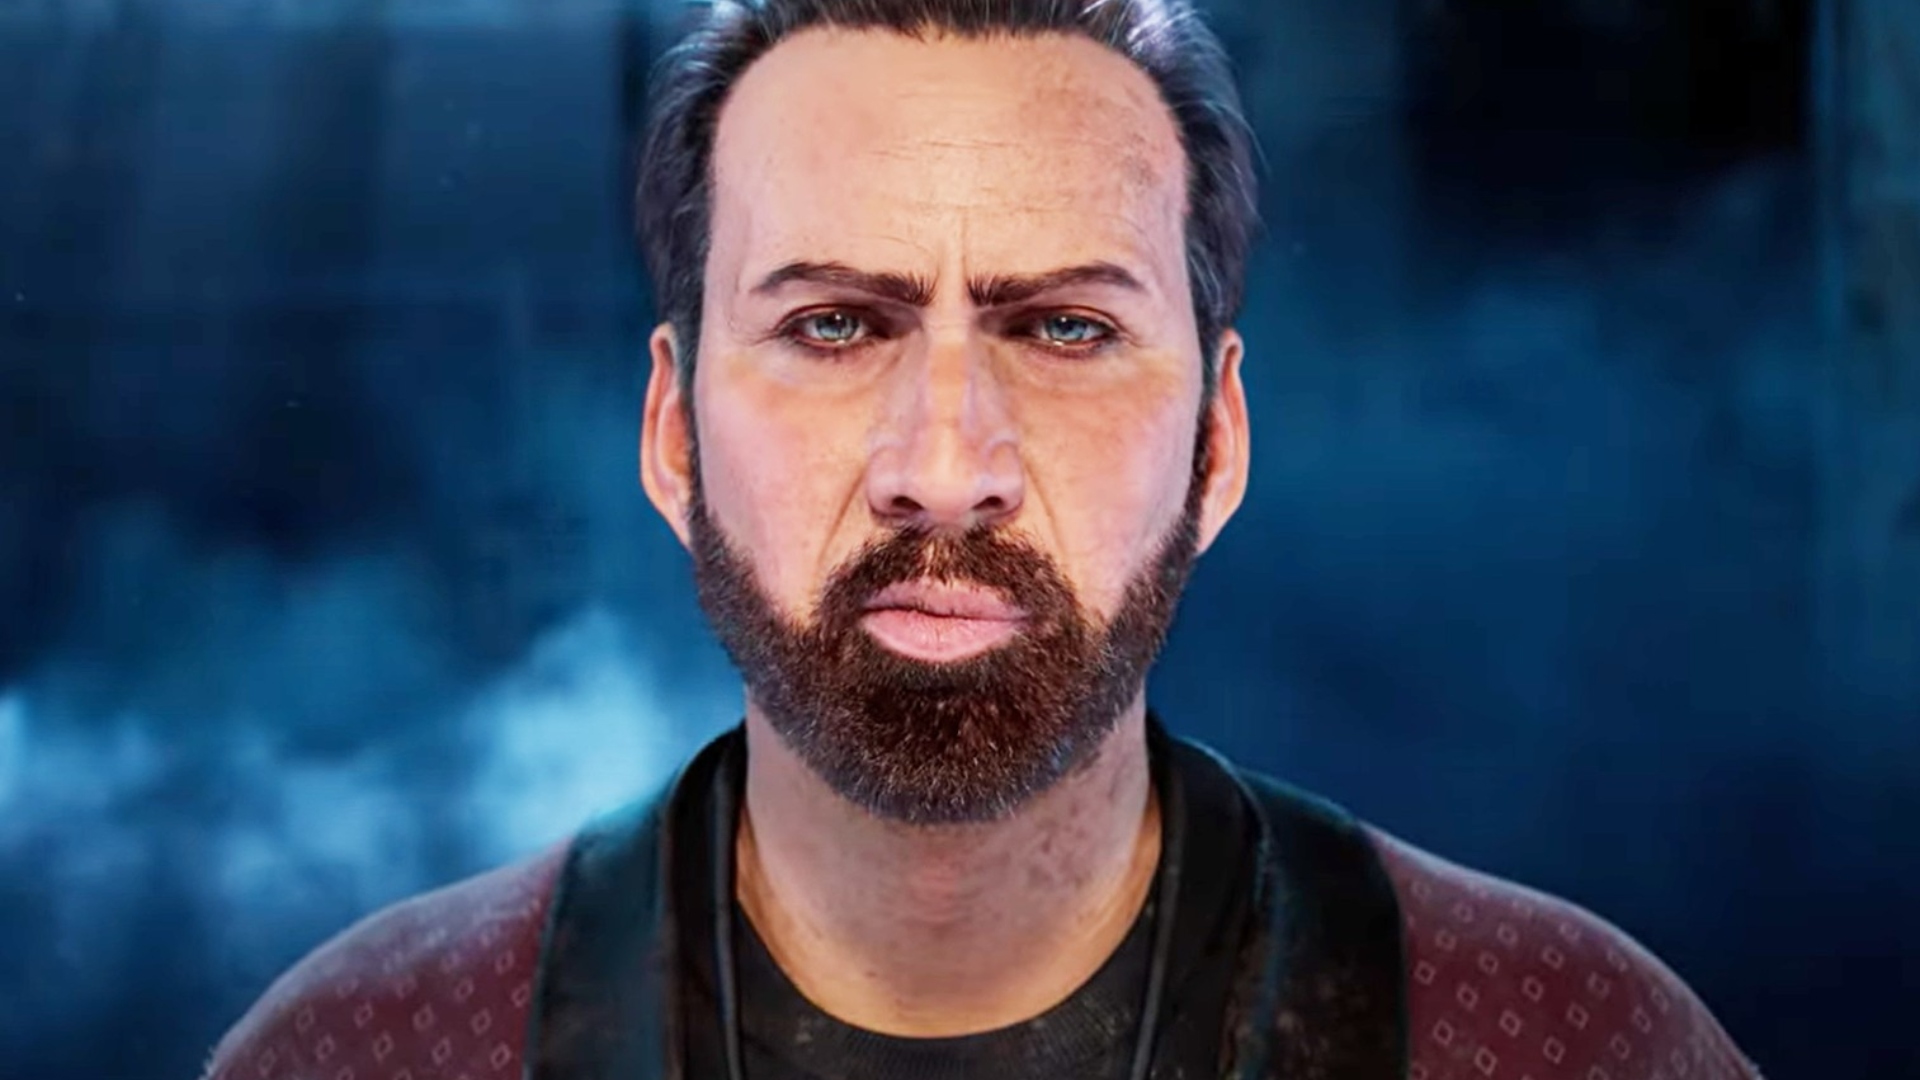 Dead by Daylight confirms new survivor is literally Nicolas Cage